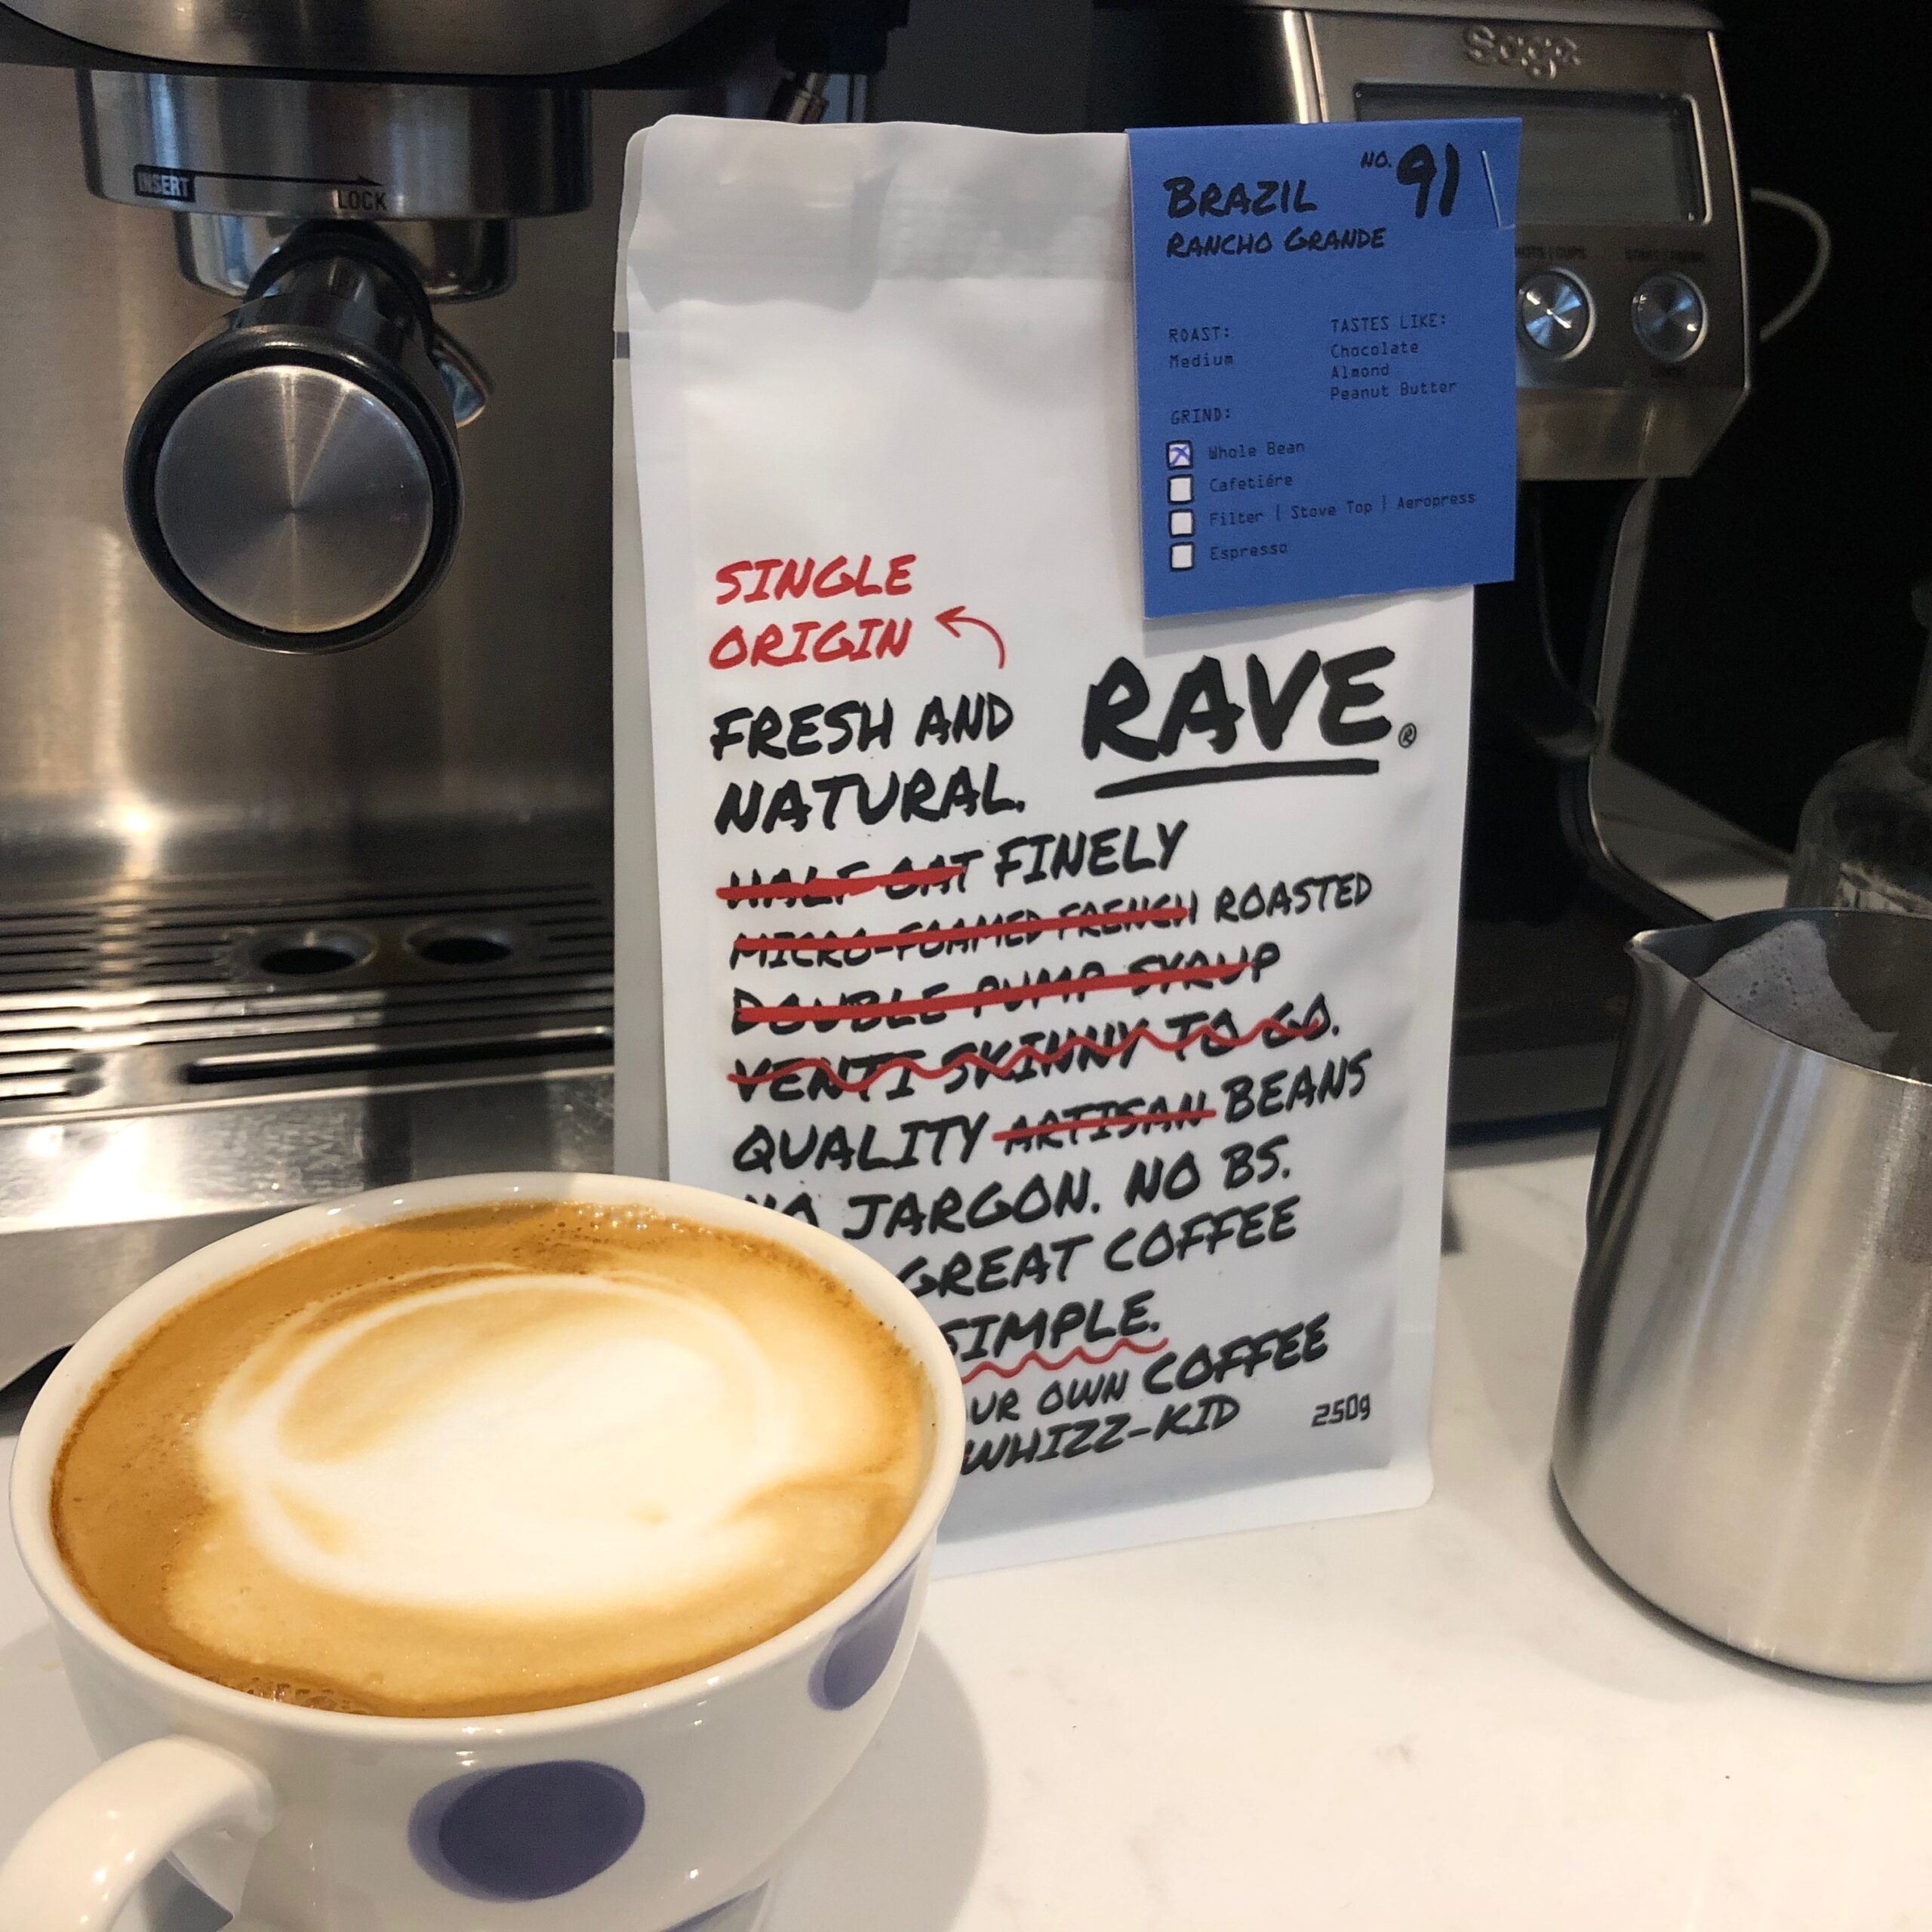 A perfect cup of lockdown coffee made with Rave coffee beans